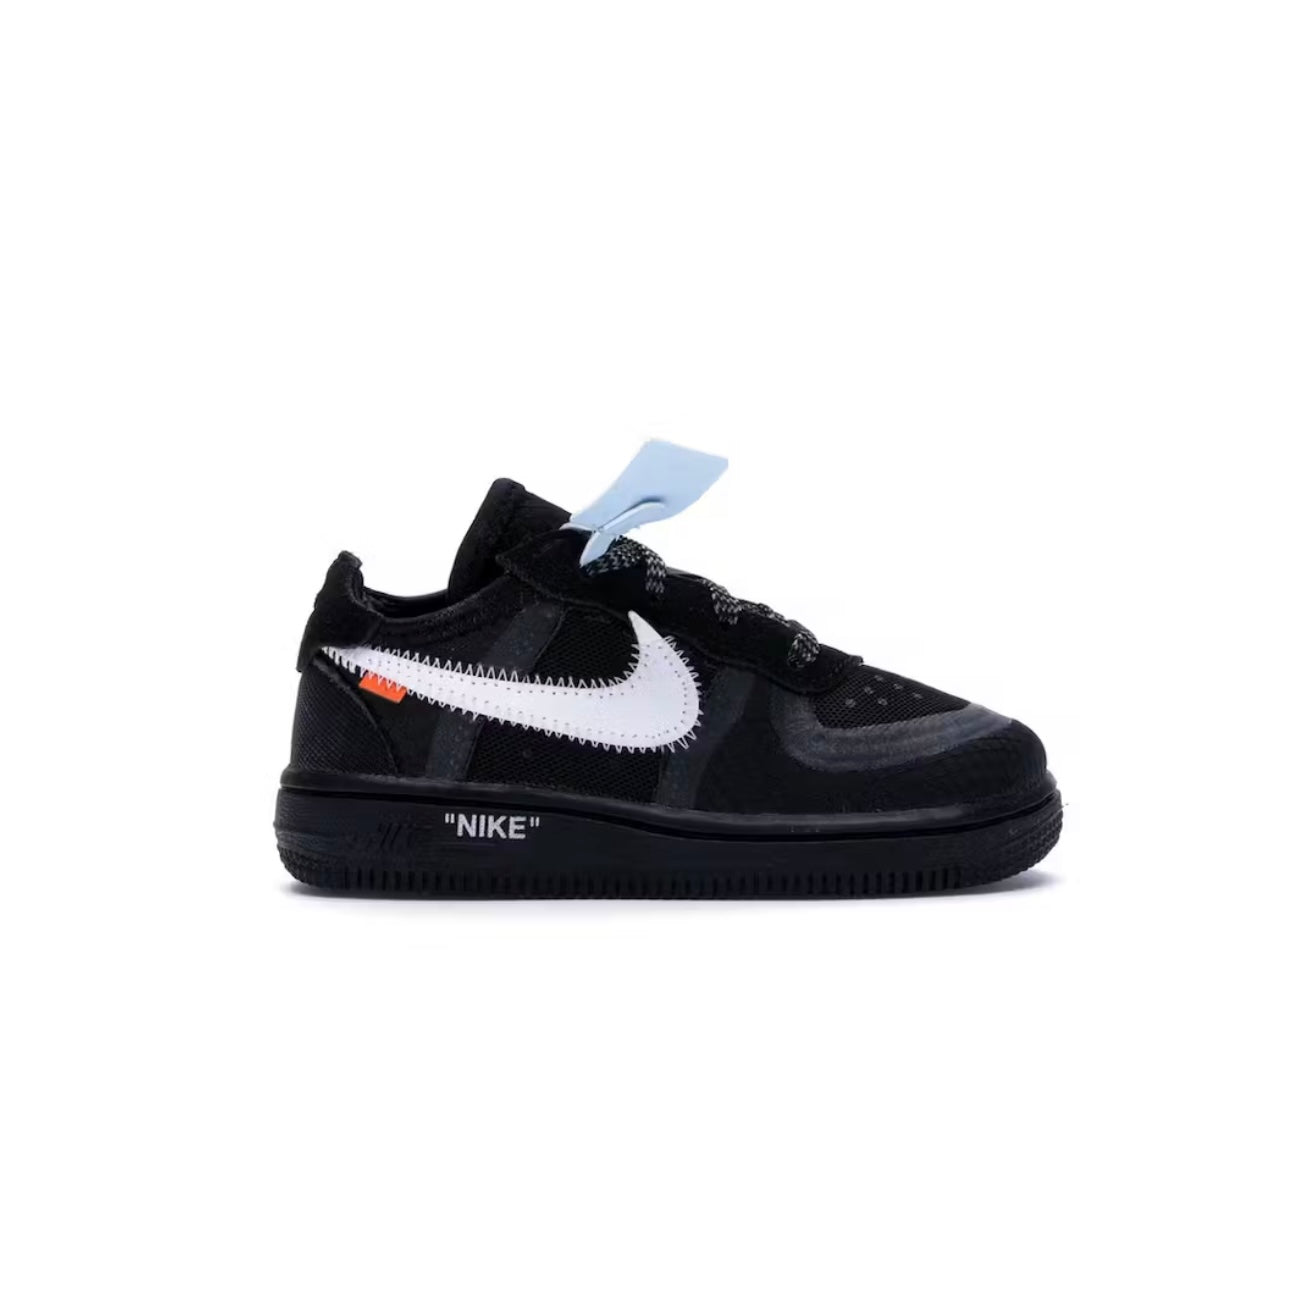 NIKE AIR FORCE 1 OFFWHITE 'BLACK' TODDLERS